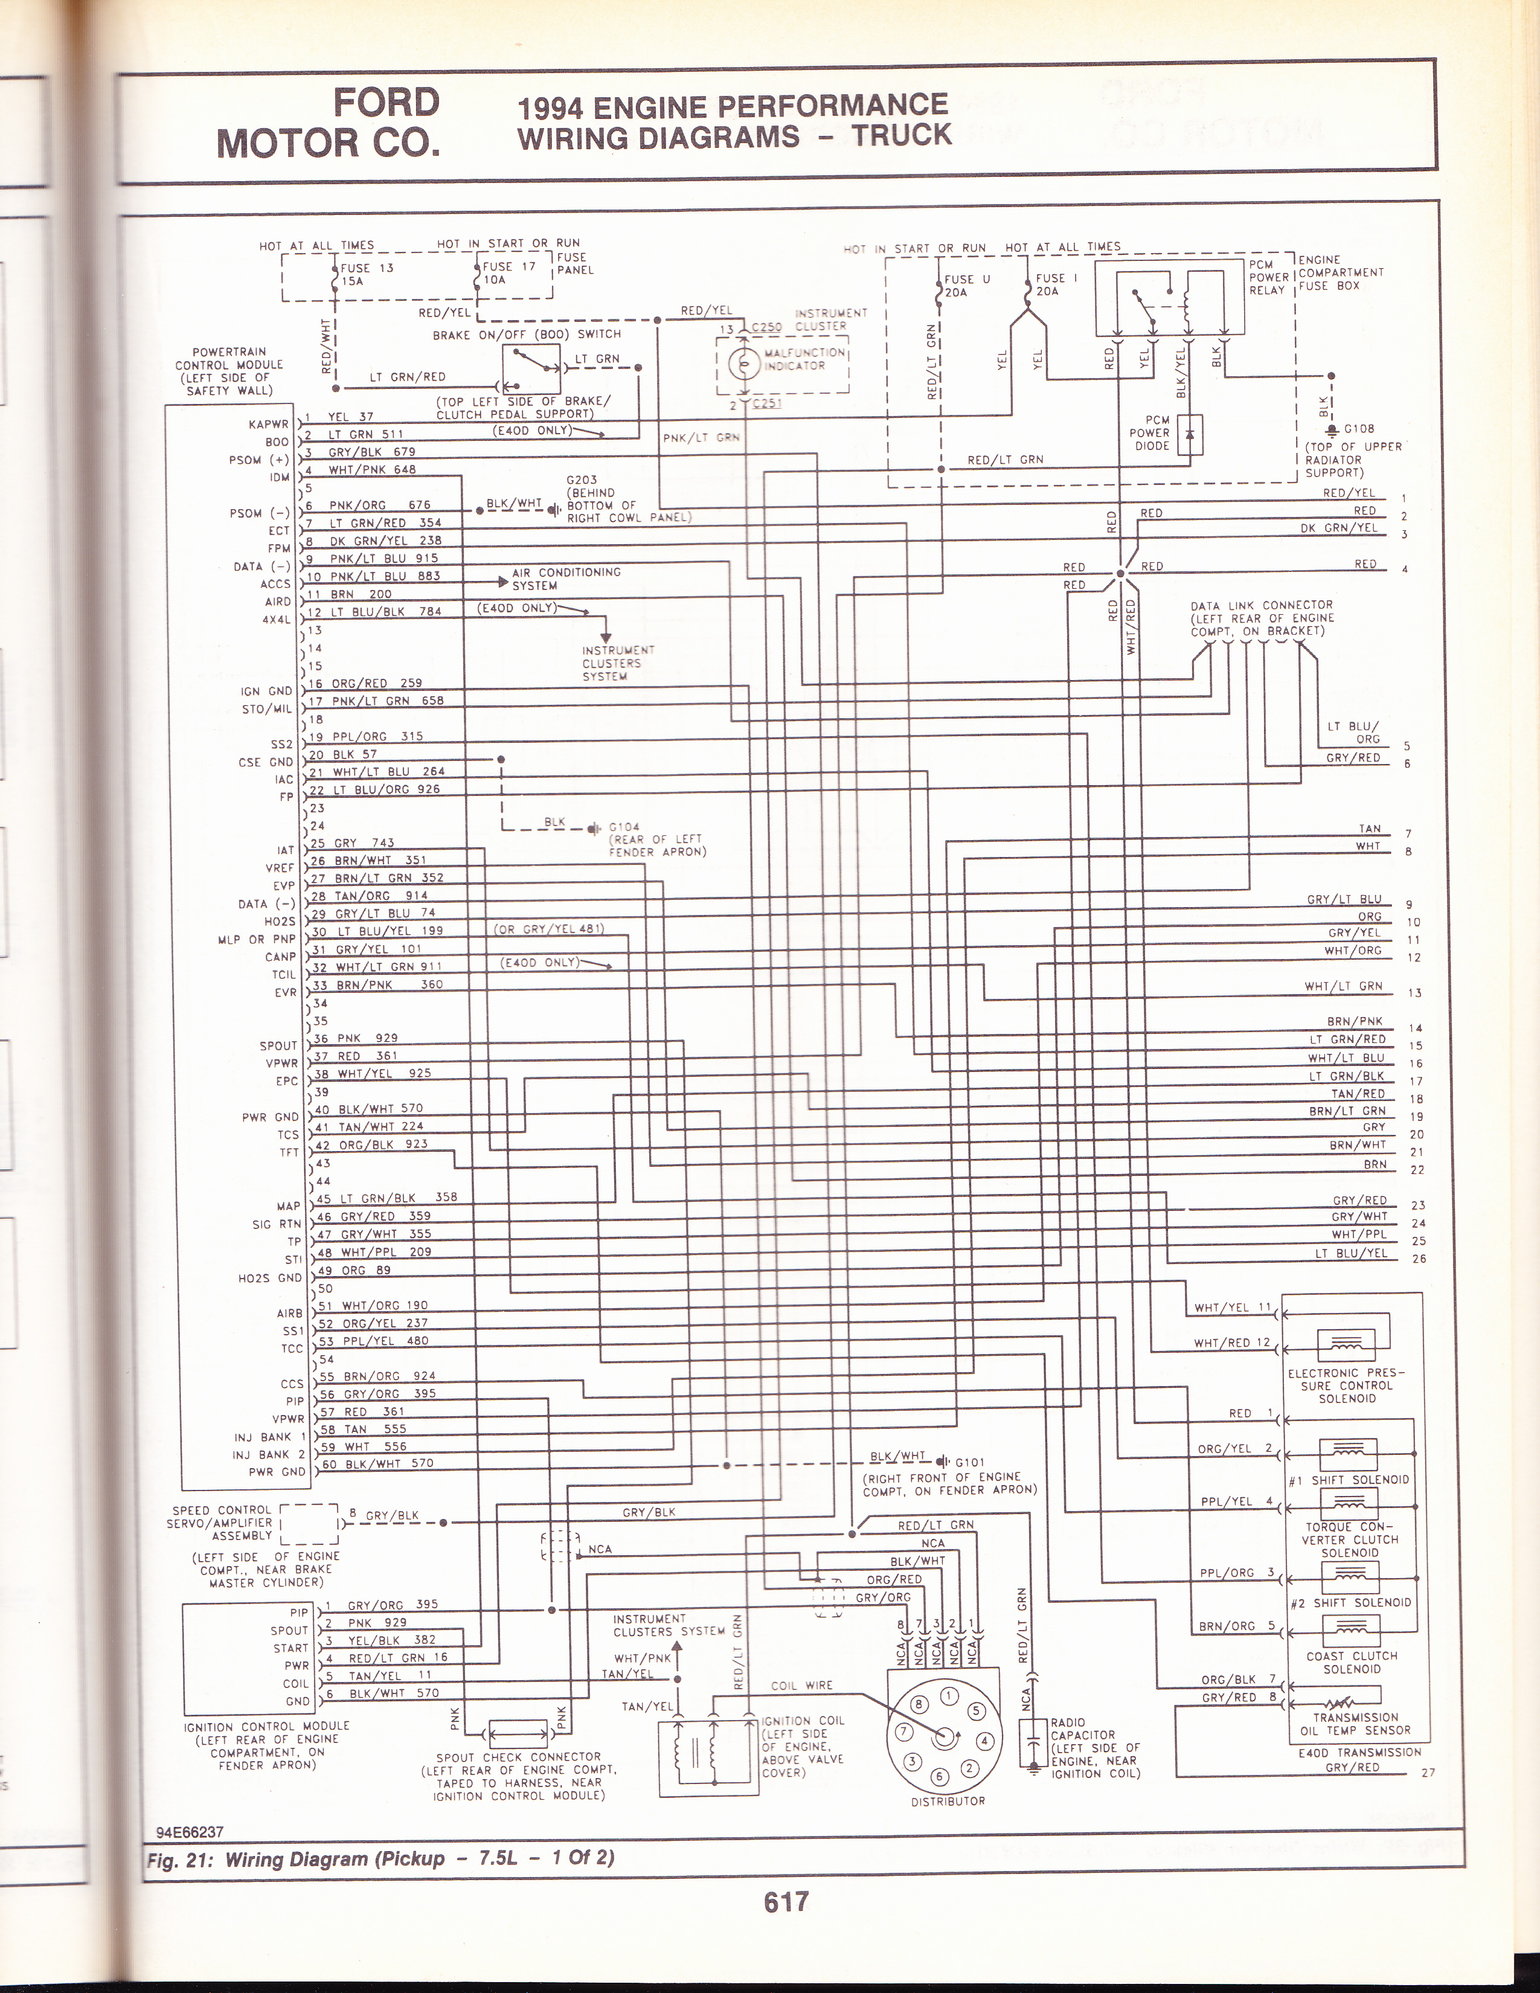 ICM wiring diagram for 1996 460 - Ford Truck Enthusiasts Forums  1995 Ford F350 Wiring Diagram 460 Motor    Ford Truck Enthusiasts